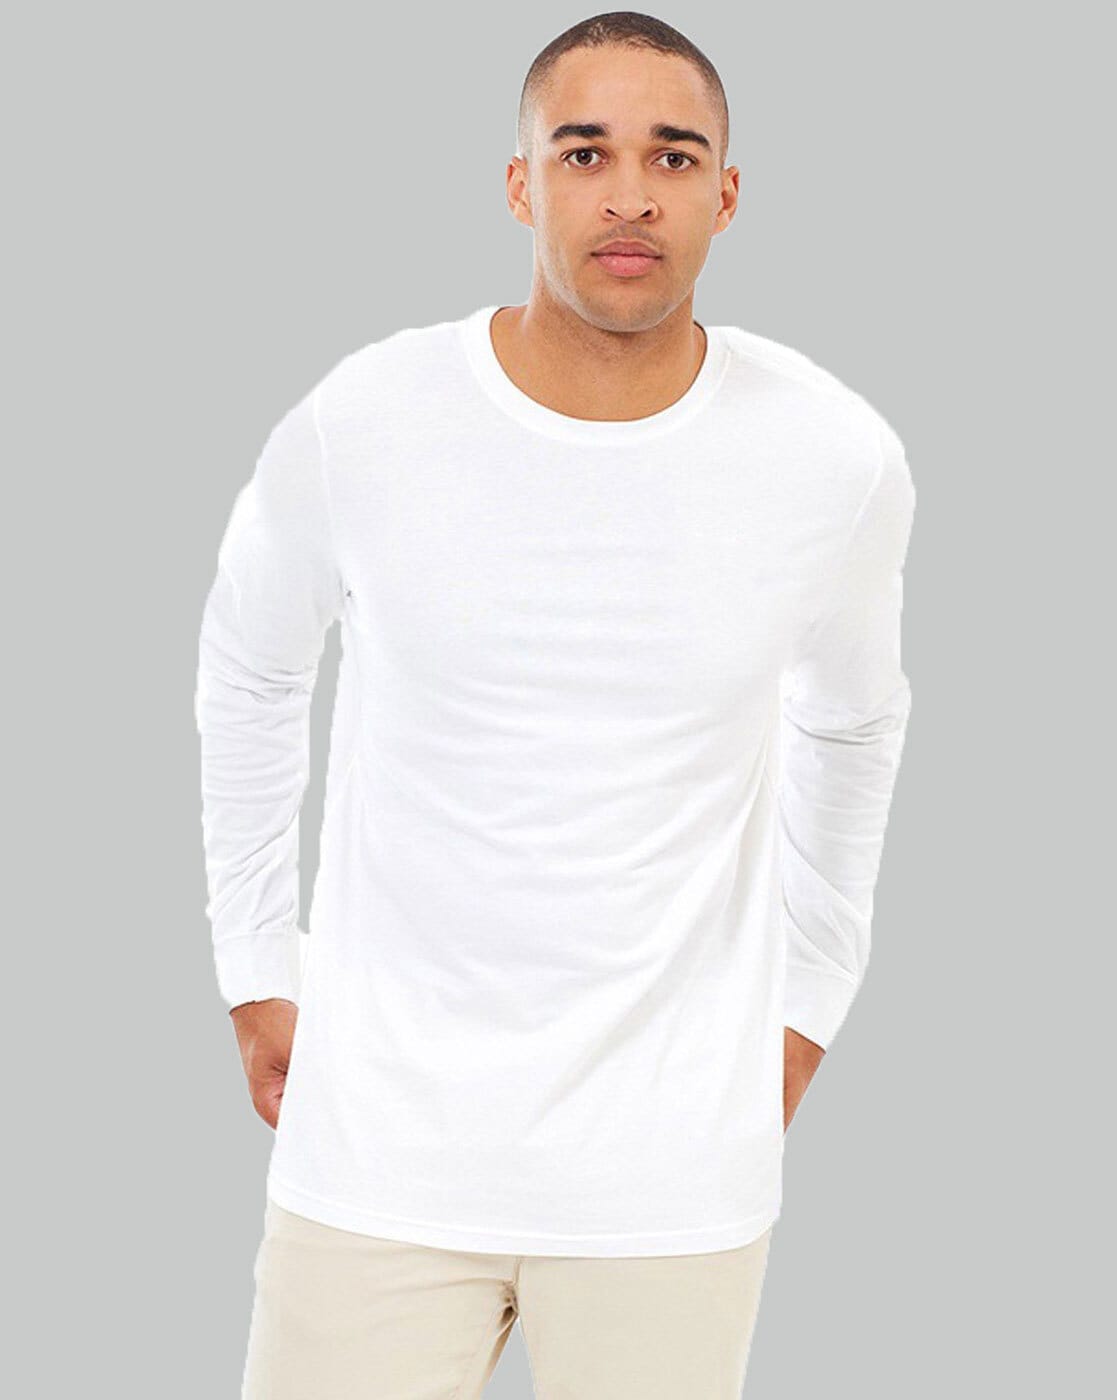 Buy White Tshirts for Men by TRENDS TOWER | Ajio.com